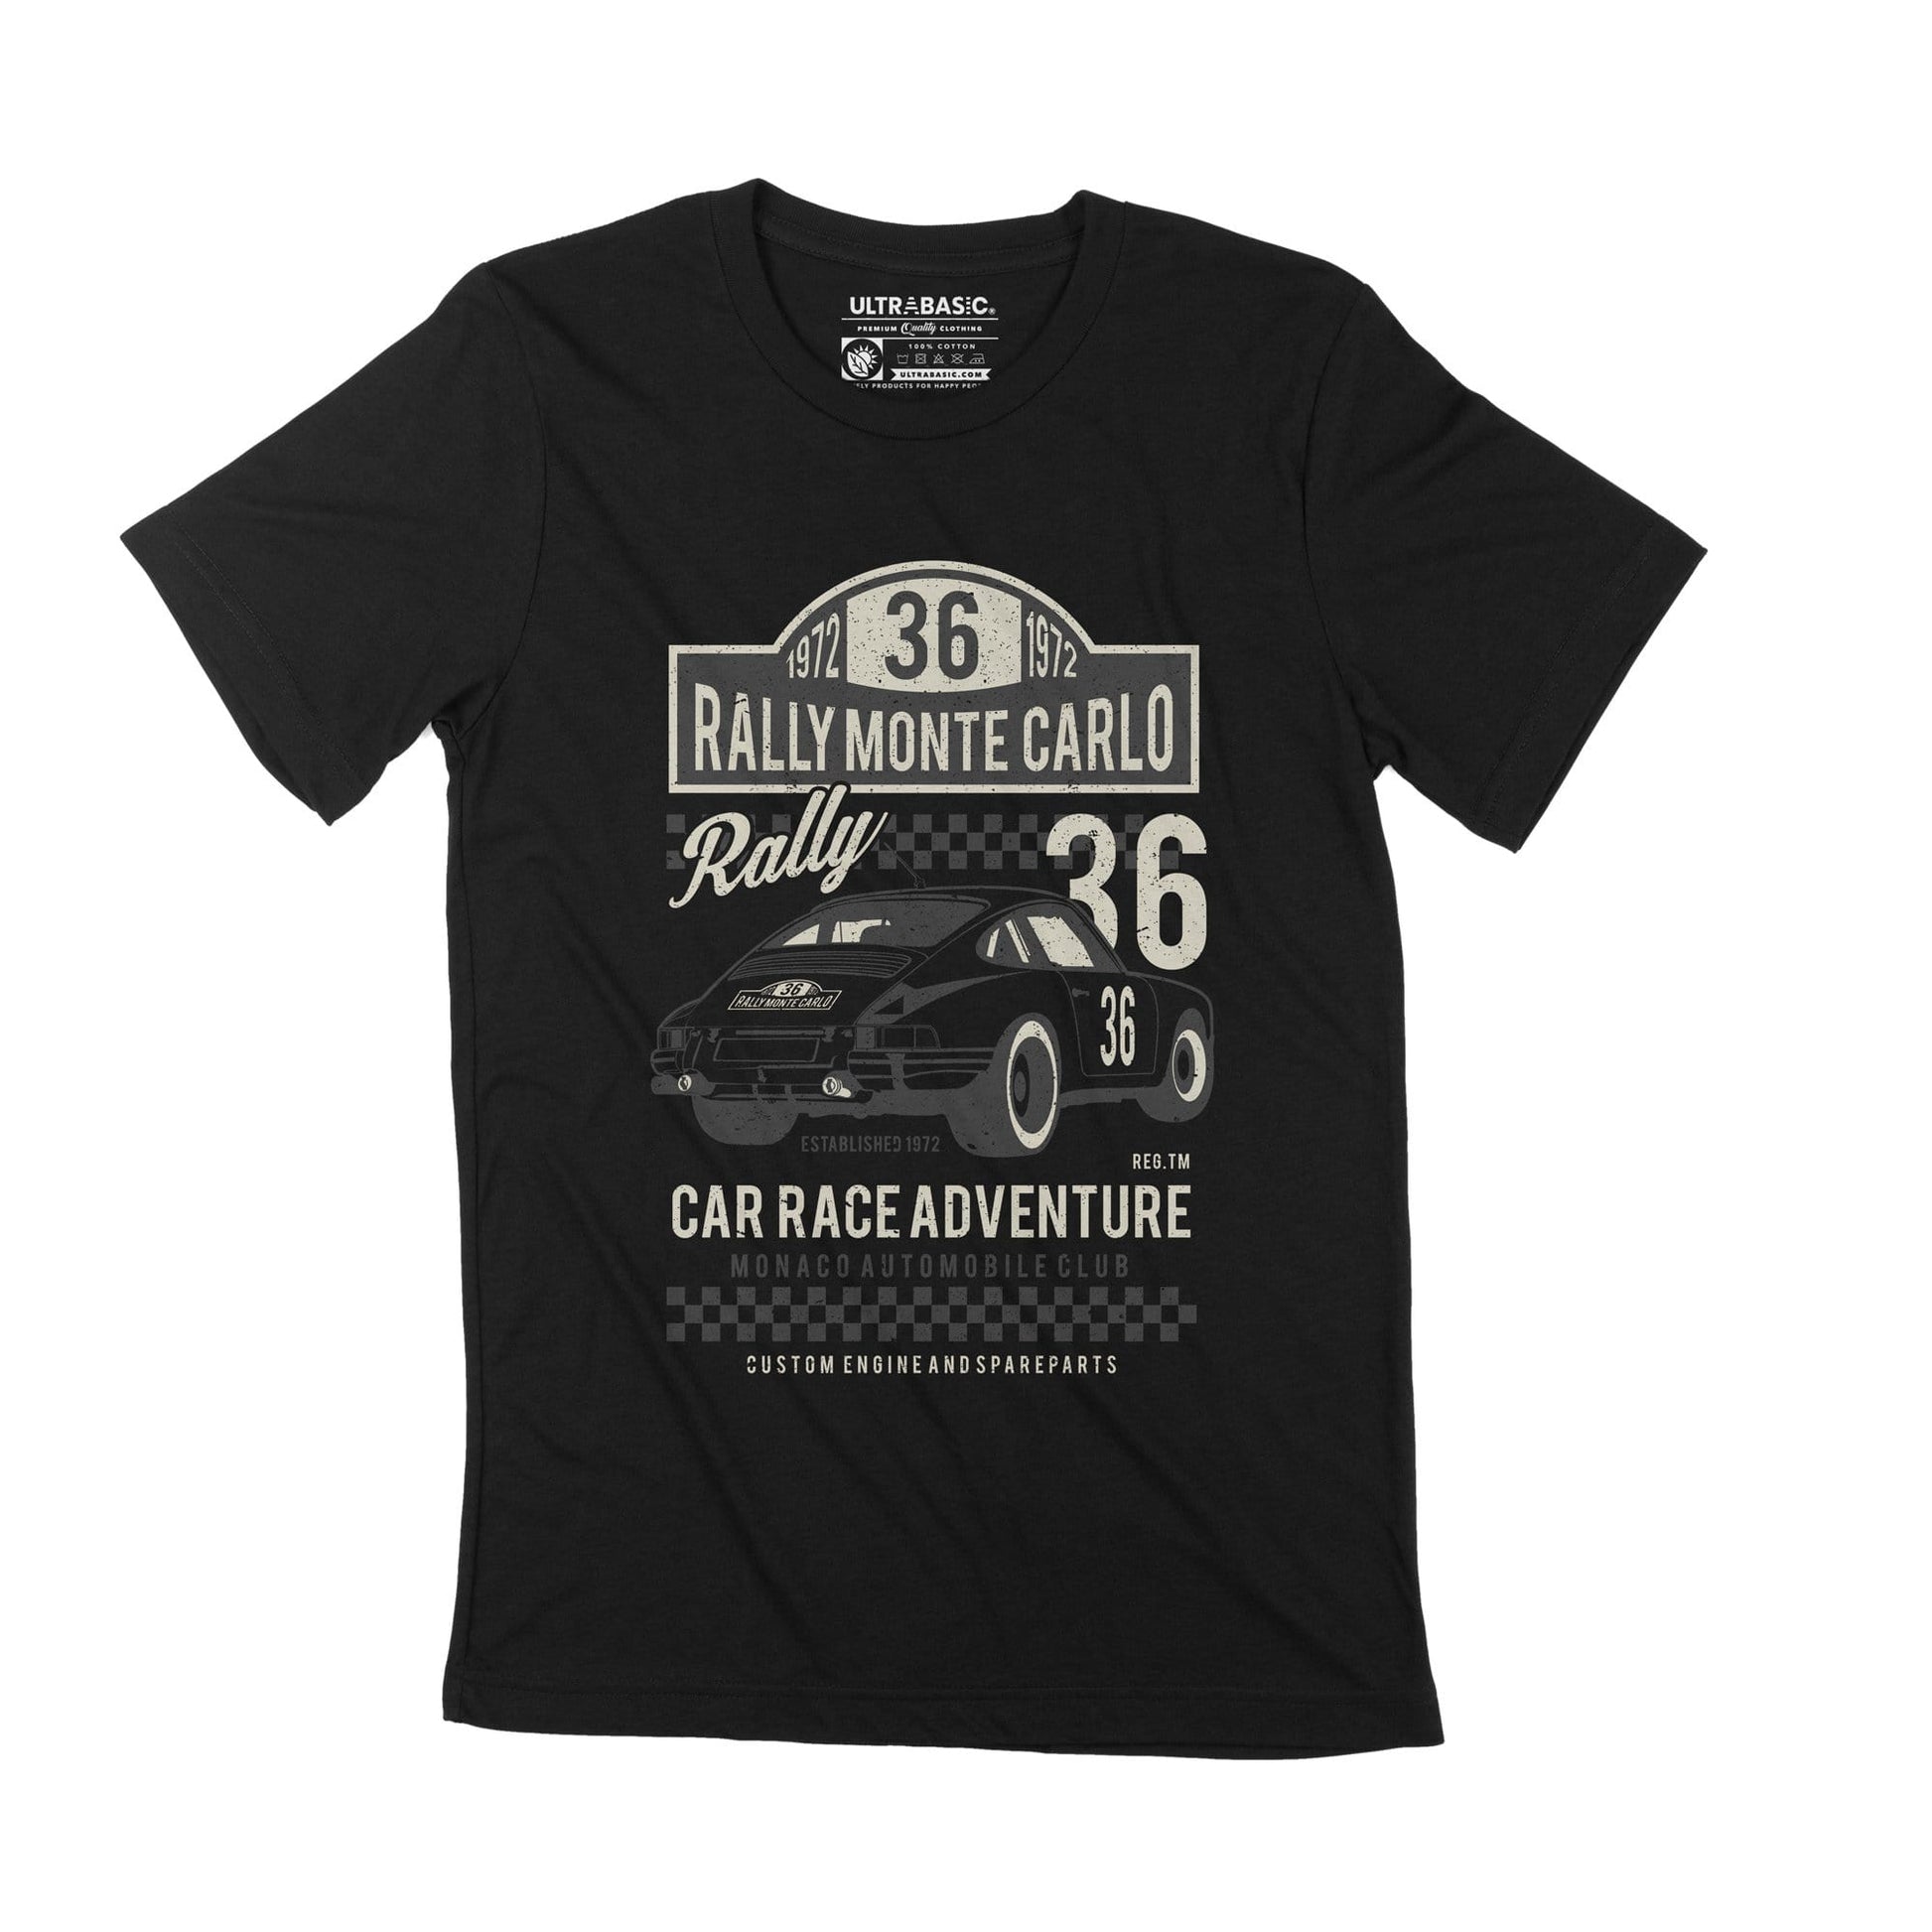 ULTRABASIC Men's T-Shirt Automobile Monte Carlo Rally 1972 - Car Race Adventure  custom engine offroad clothing merch fathers day dad apparel merchandise outdoor mechanic victory outfit road tees unisex genuine fast driving casual womens christmas present novelty unisex classic guys adult casual history design formula club